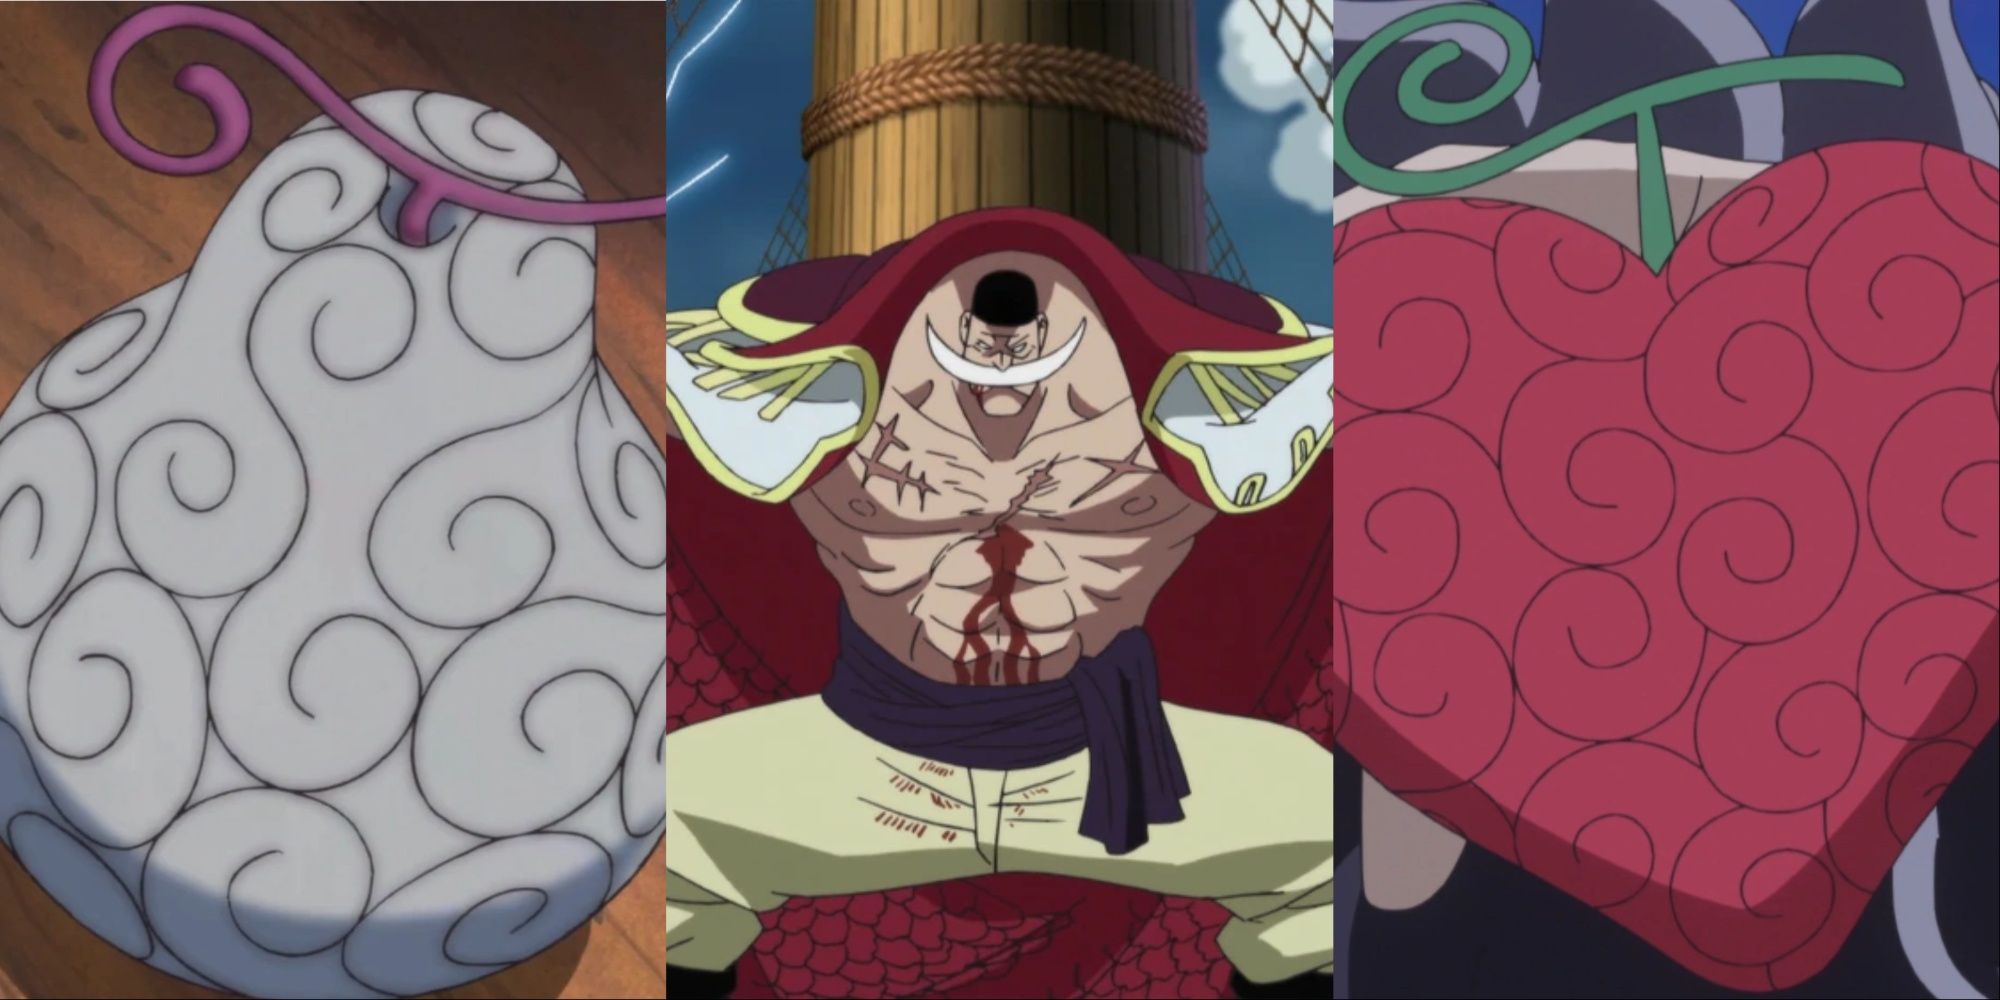 Leave your thoughts on the Kage Kage no Mi and it's potential 👻 Follow for  more One Piece content!